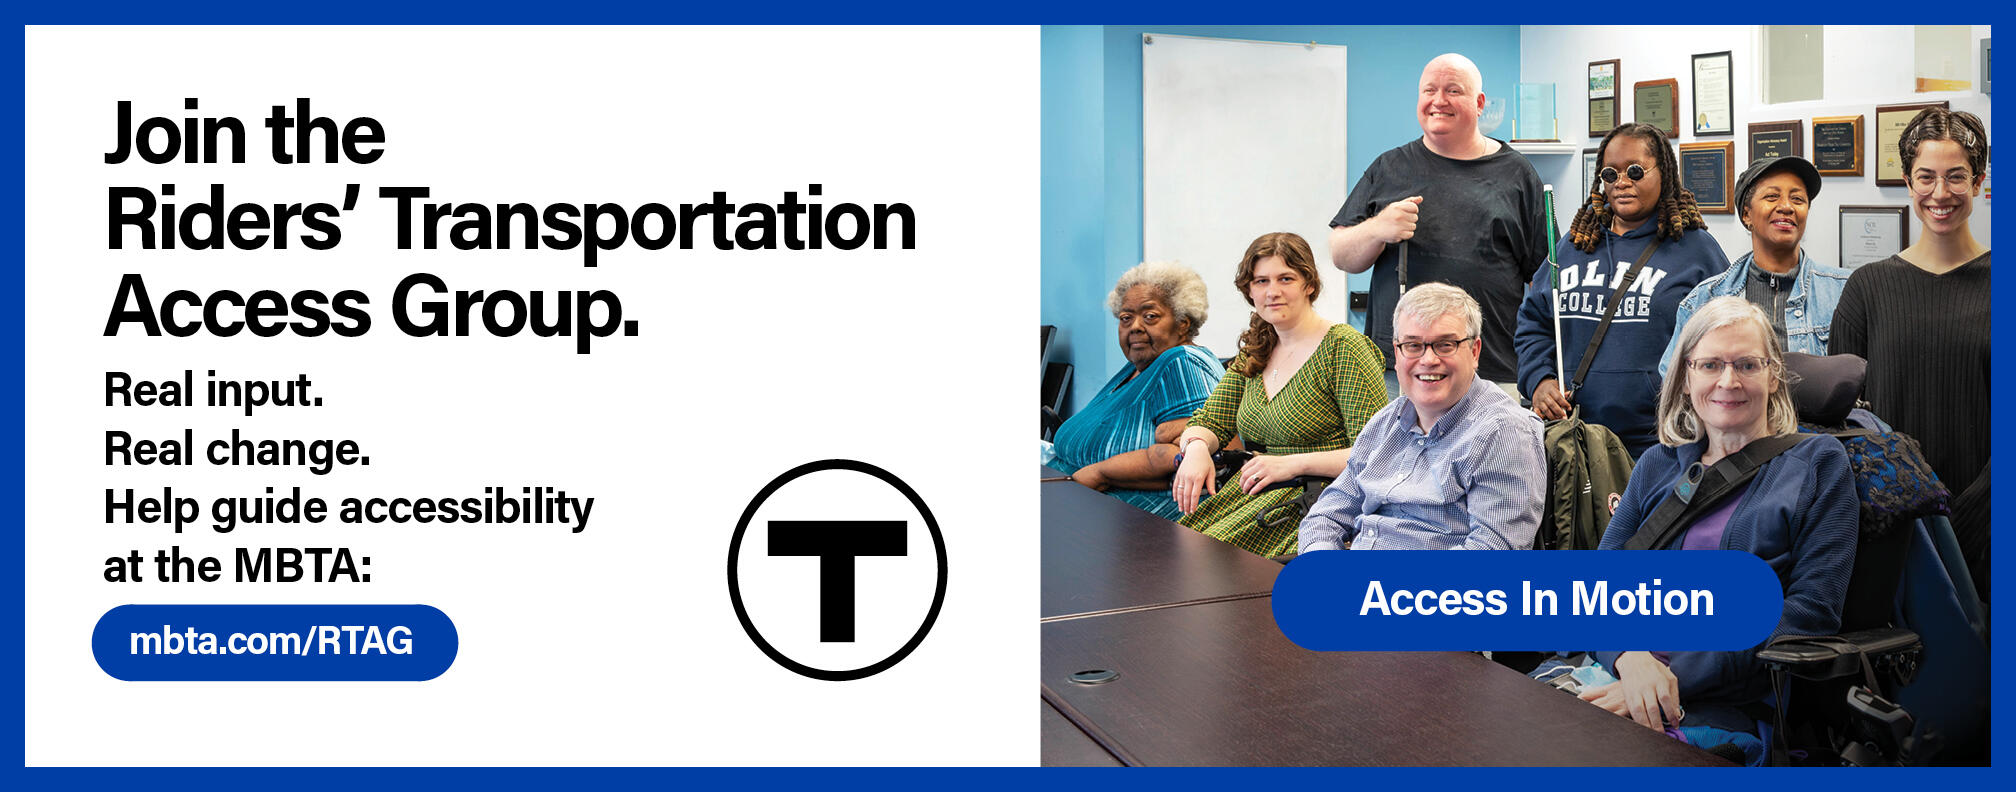 A group of people pose next to a conference table. The tagline “Access In Motion” appears in a blue bubble in the foreground. Text reads: “Join the Riders’ Transportation Access Group.” Smaller text reads: “Real input. Real change. Help guide accessibility at the MBTA: mbta.com/RTAG” followed by the T logo and the “Access in Motion” tagline.